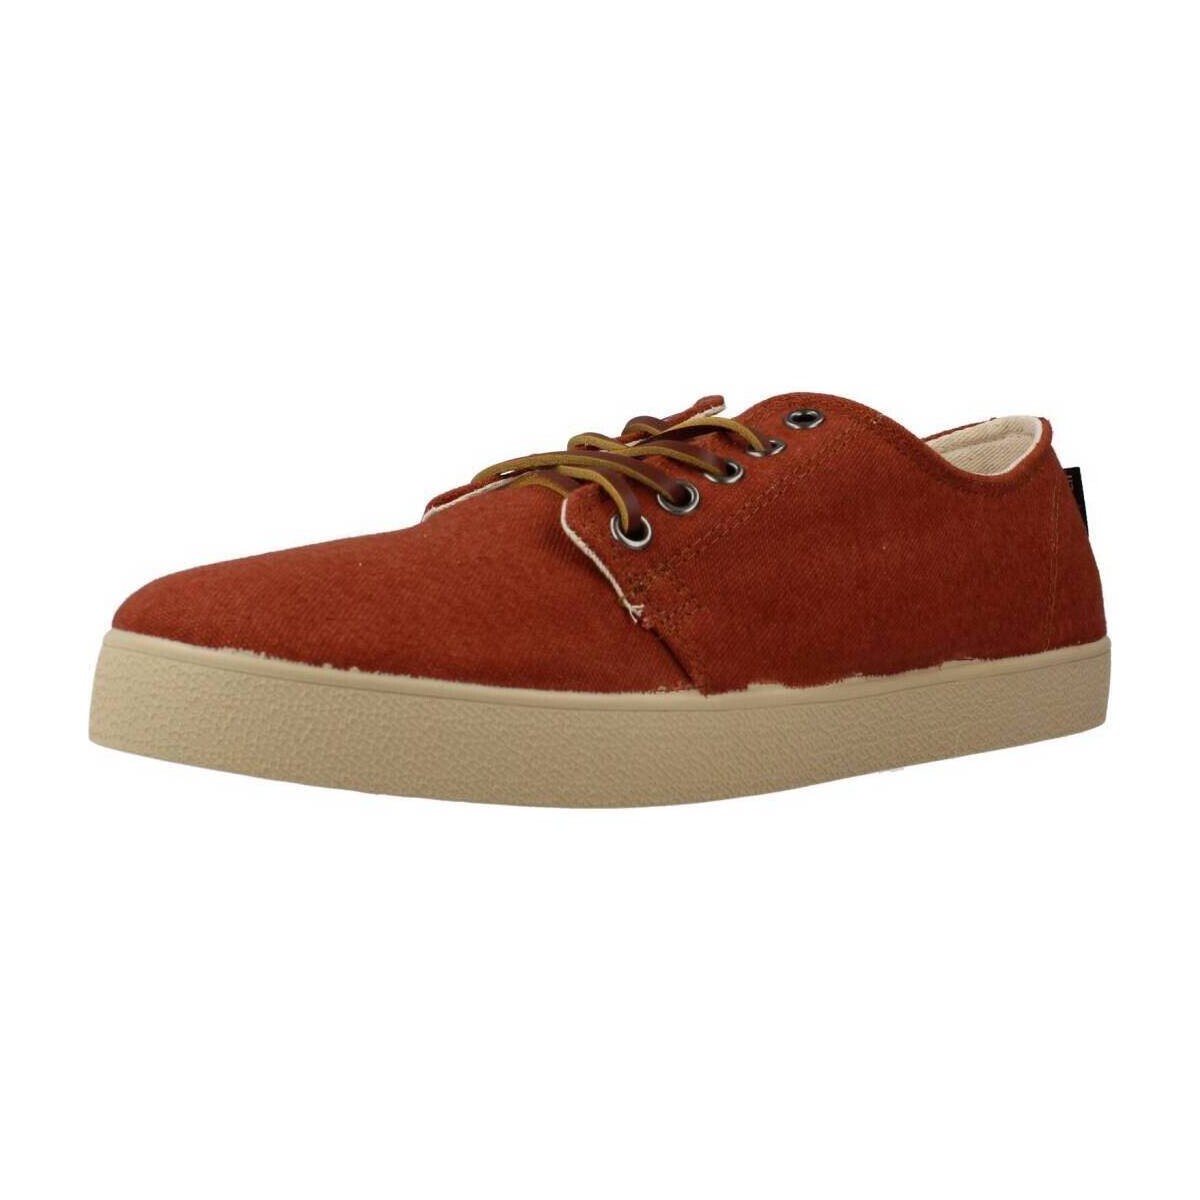 Chaussures Homme U.S Polo Assn Pompeii 138988 Rouge